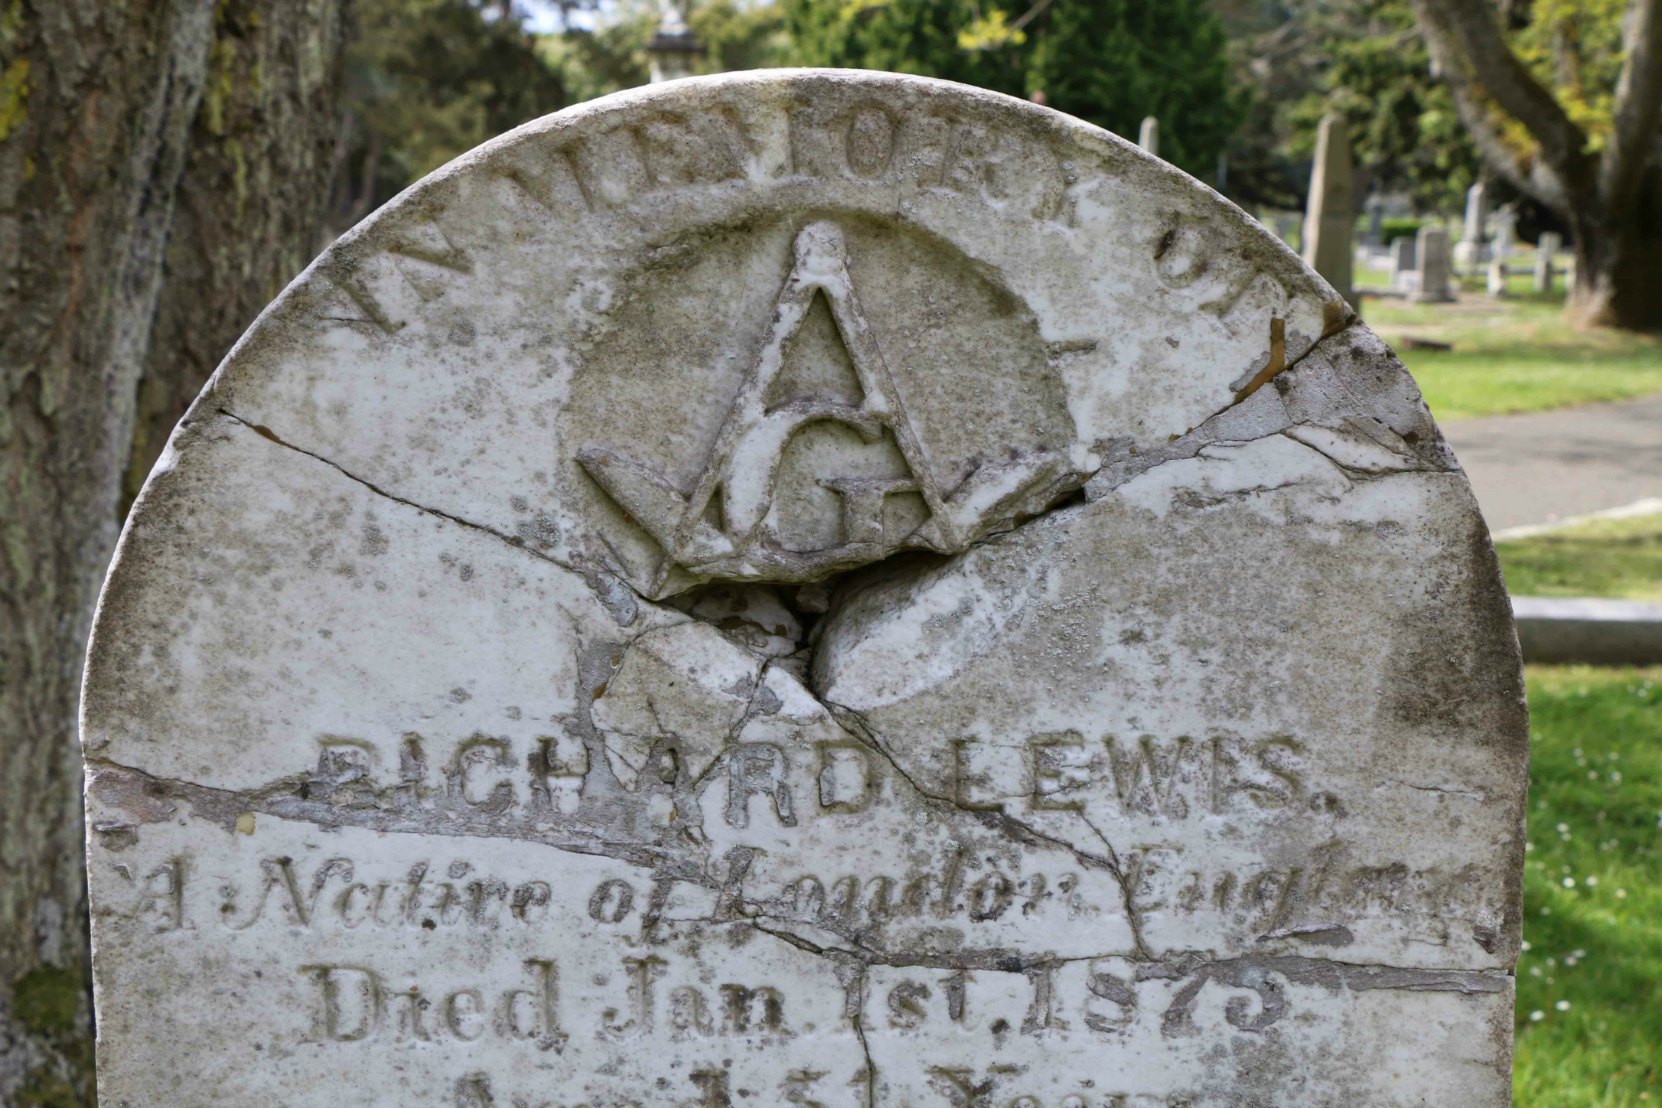 Vandalism damage to Richard Lewis gravestone has been repaired by the Old Cemeteries Society of Victoria